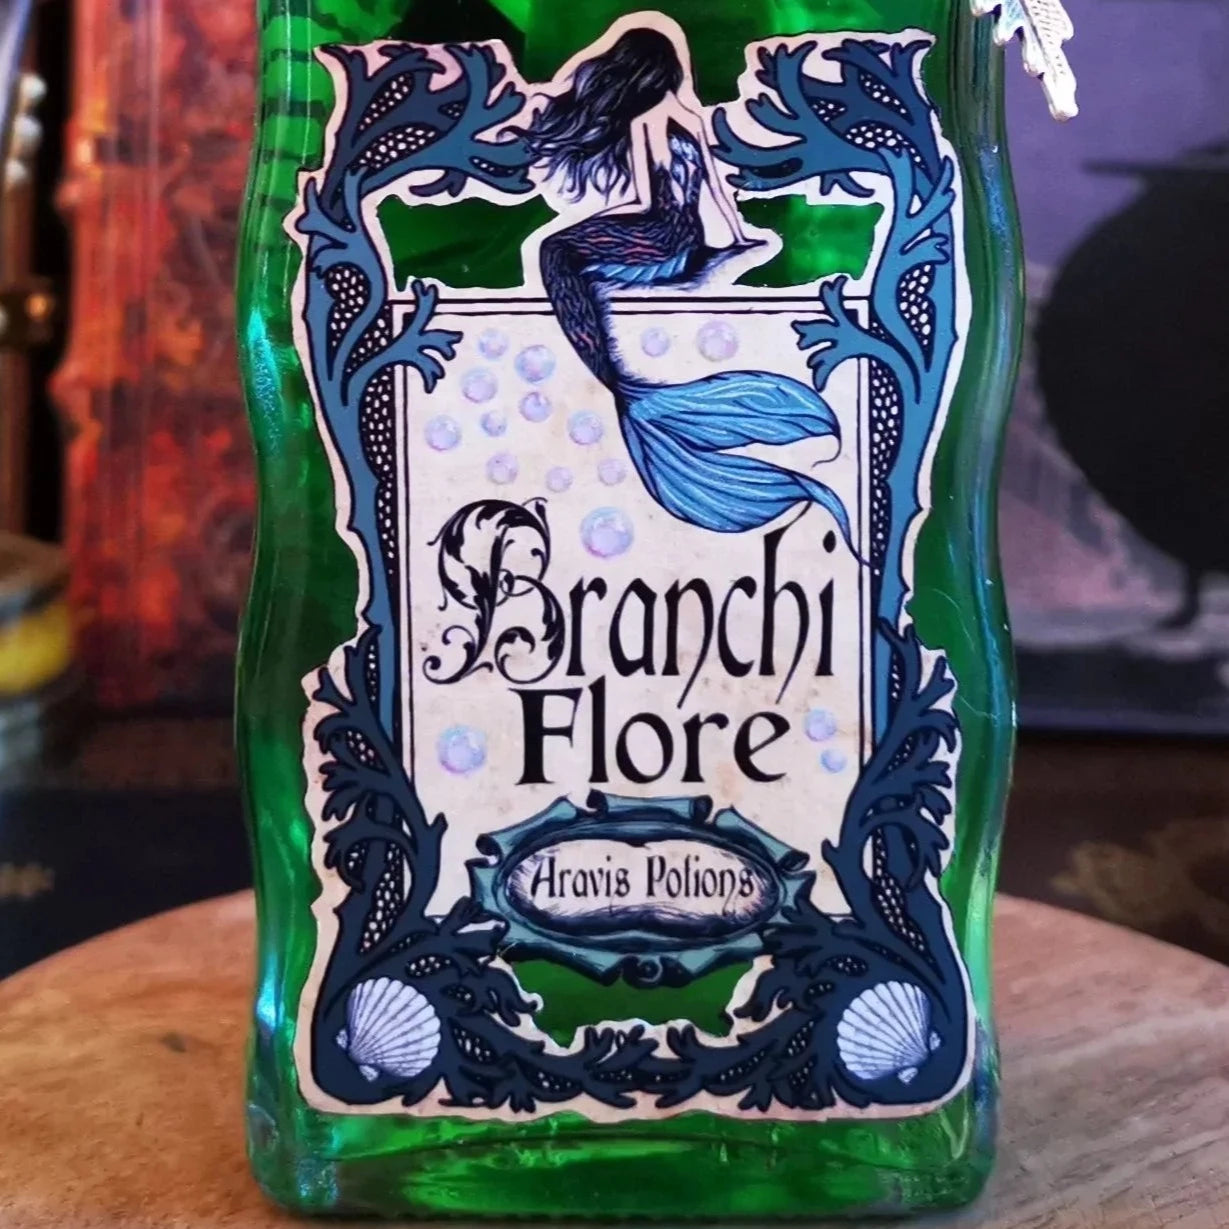 Branchiflore - Gillyweed Aravis Potions Apothecary Harry Potter